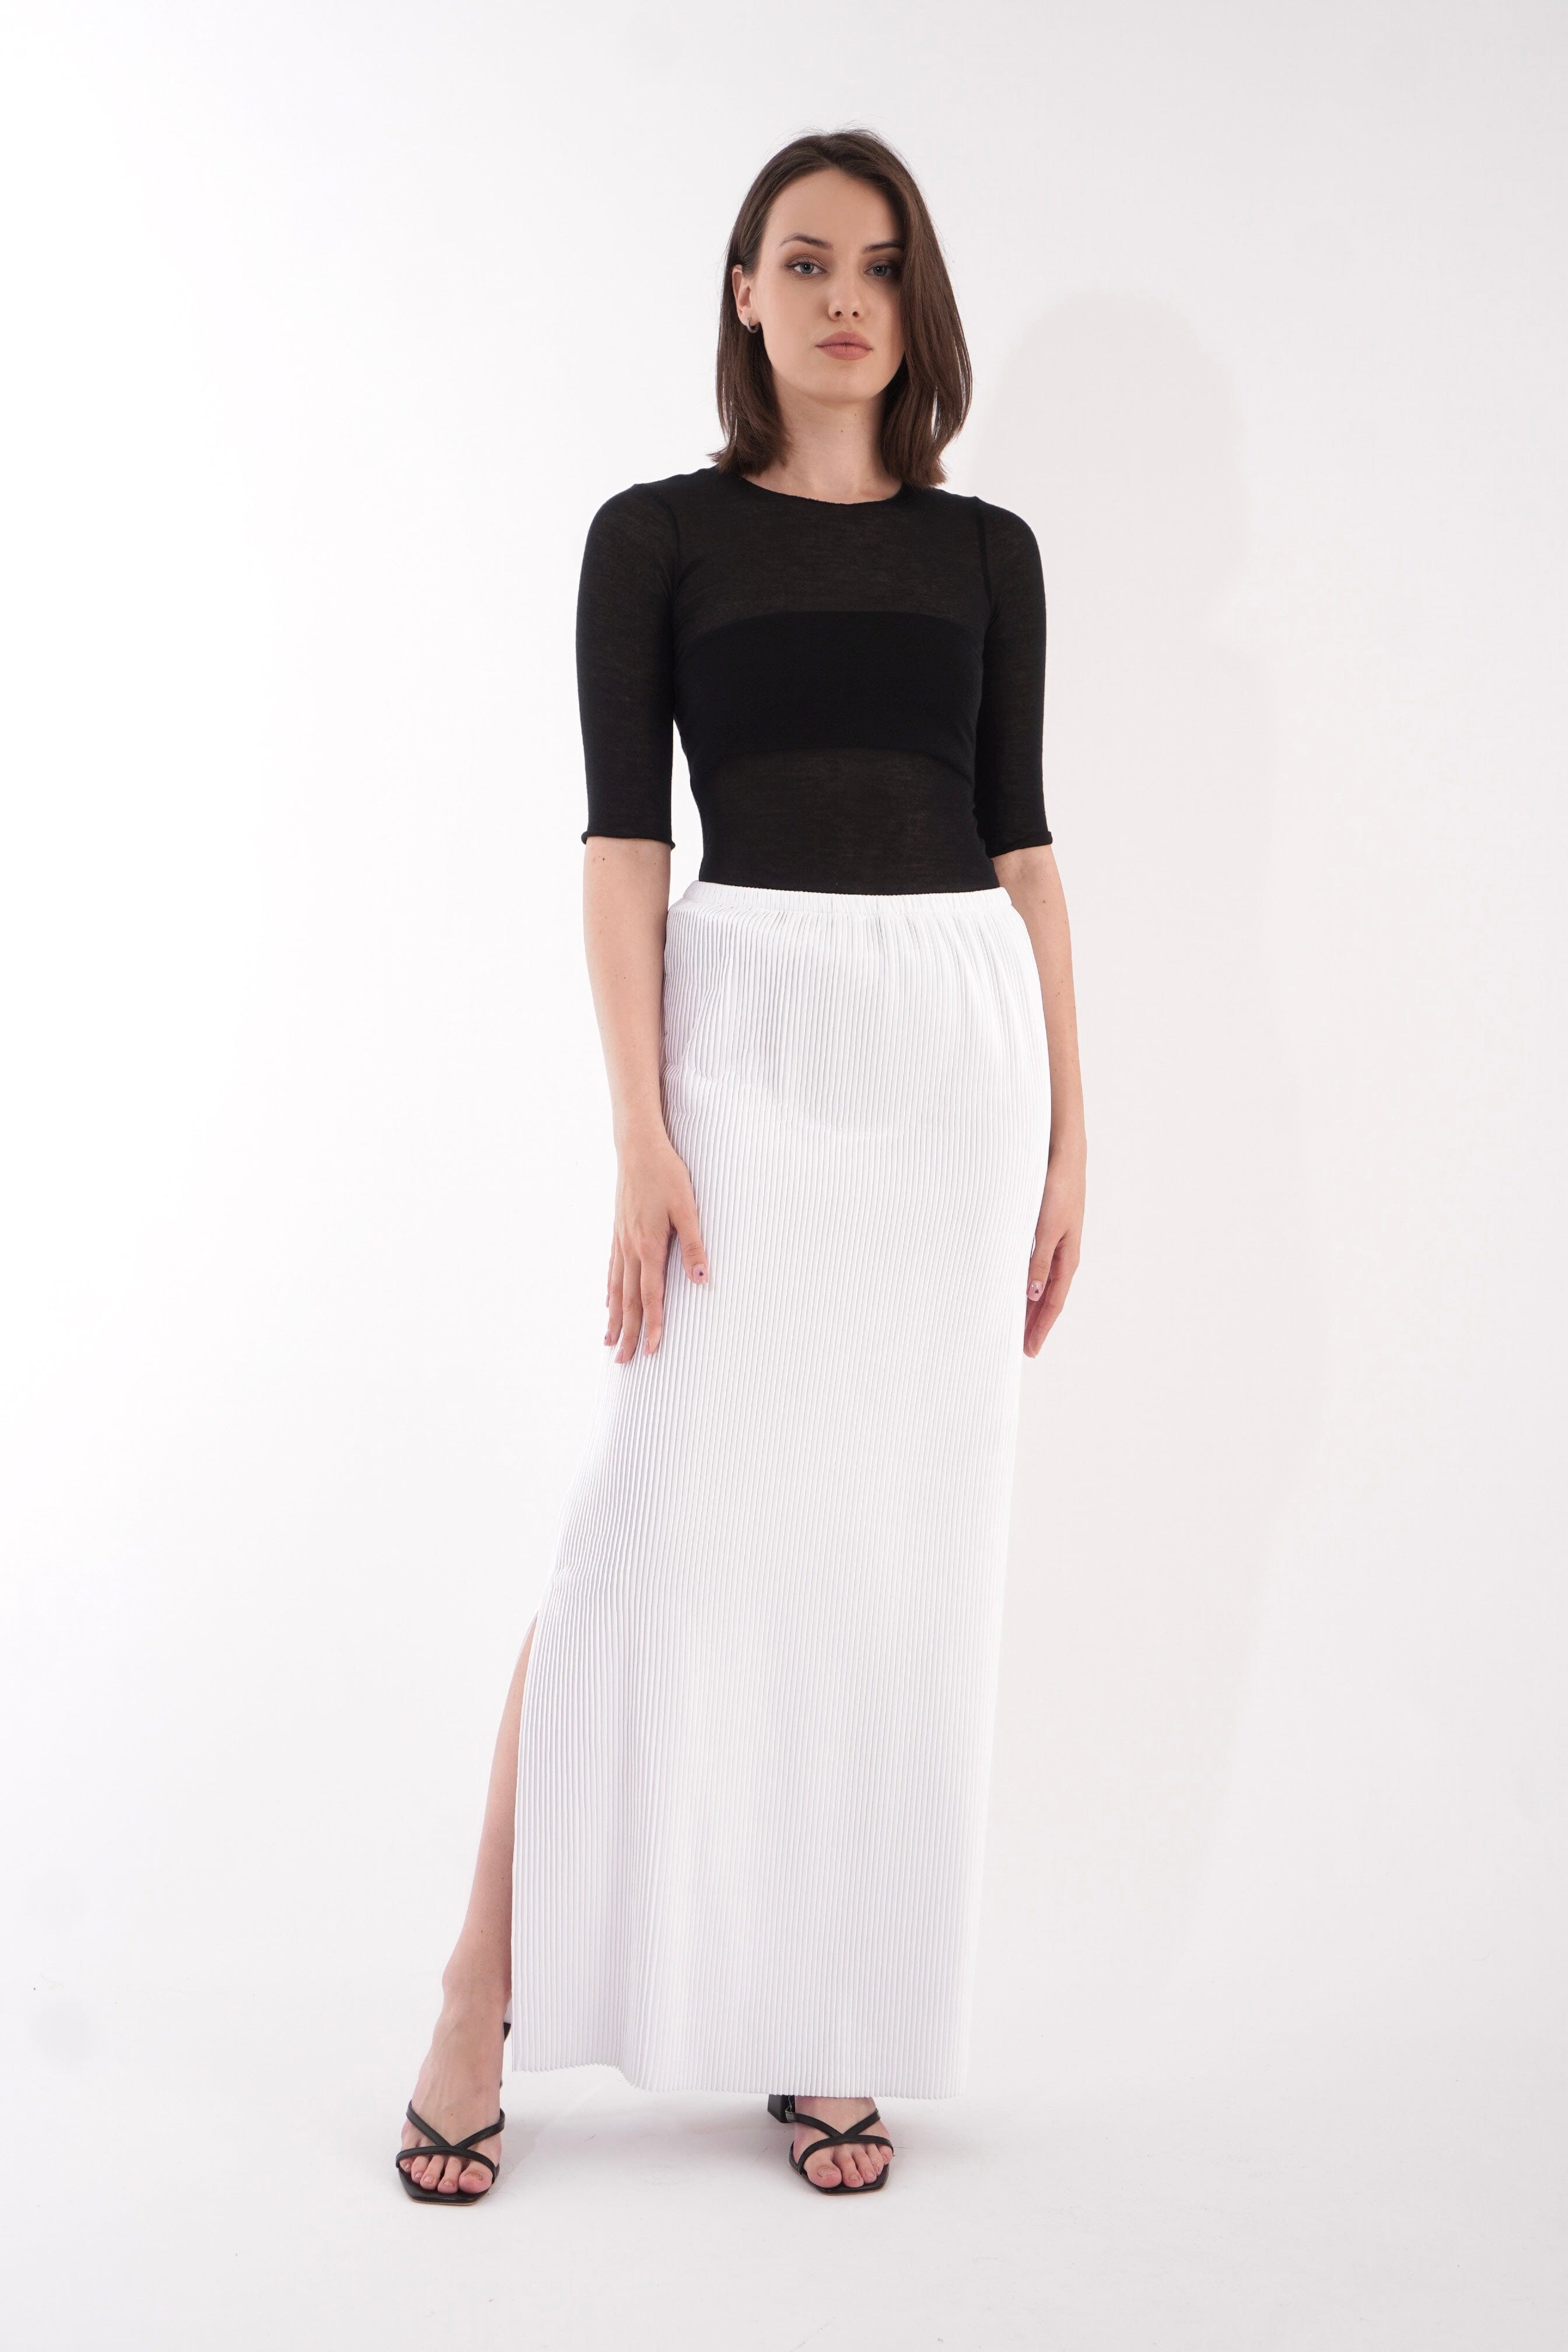  Miracle Plisse Skirt White Product Amoralle